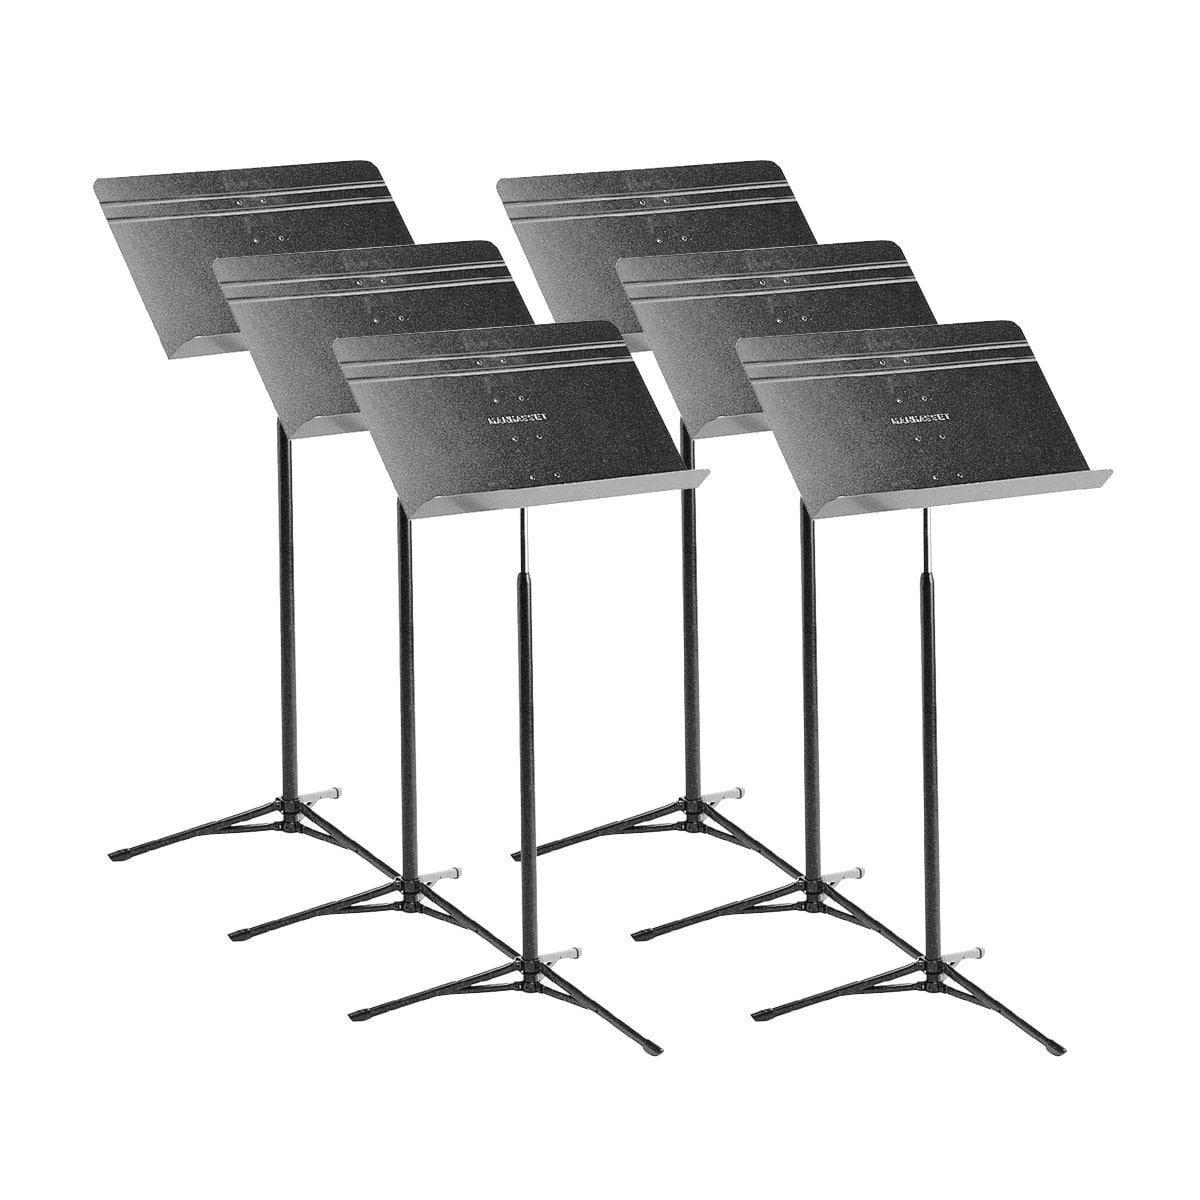 MANHASSET MUSIC STAND VOYAGER 52 - PACK OF 6